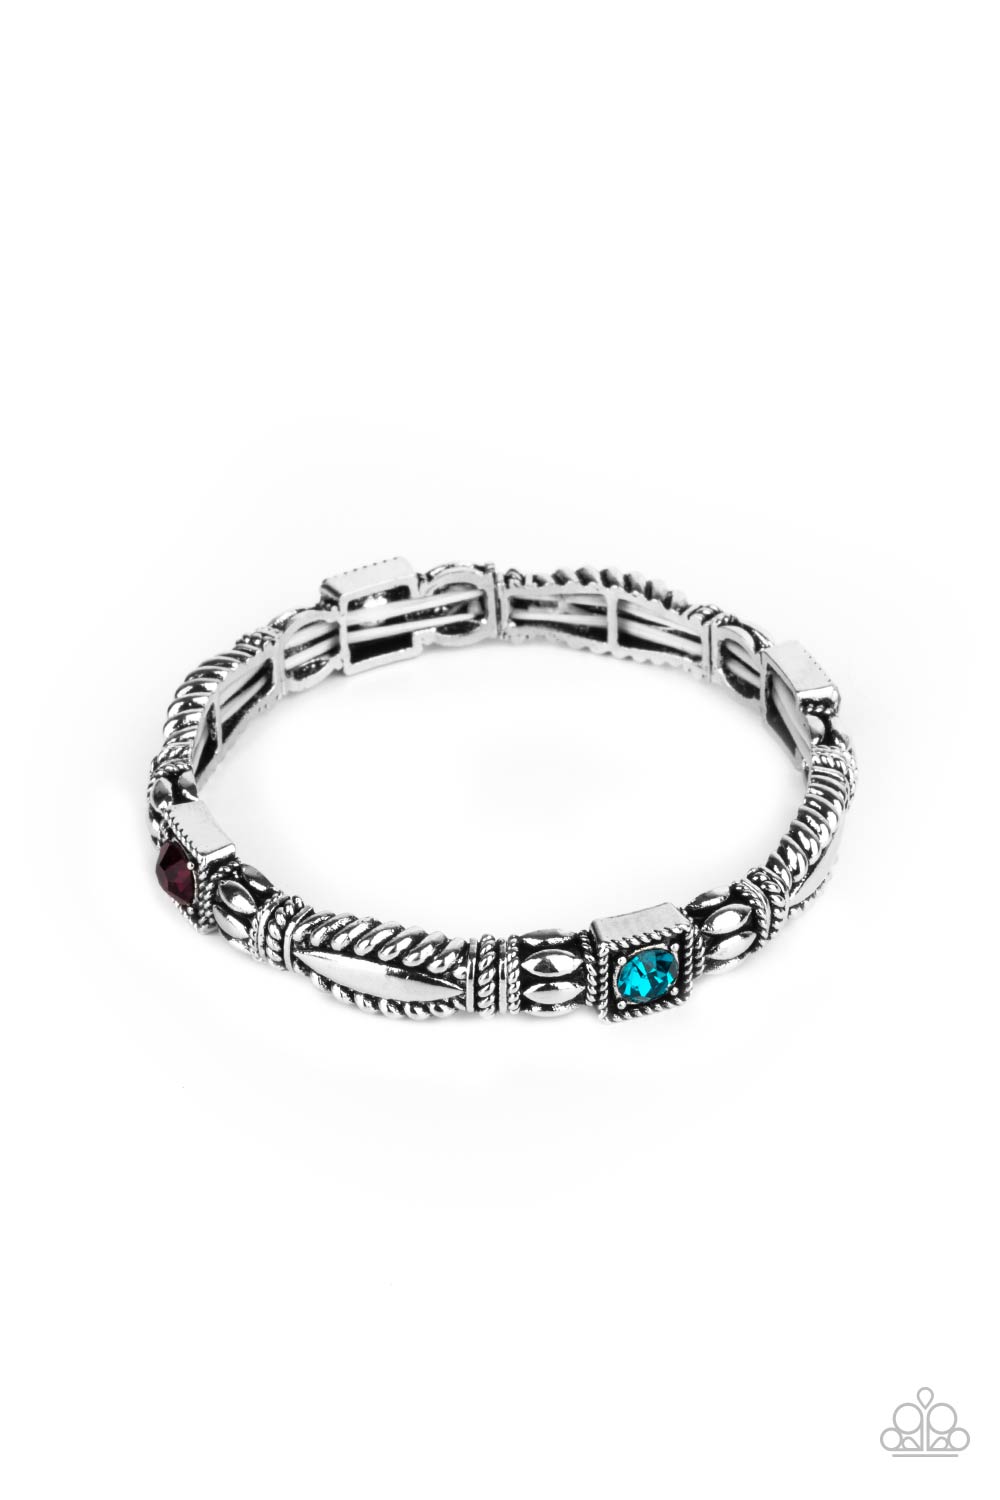 Paparazzi - Get This GLOW On The Road - Multi - Bracelet